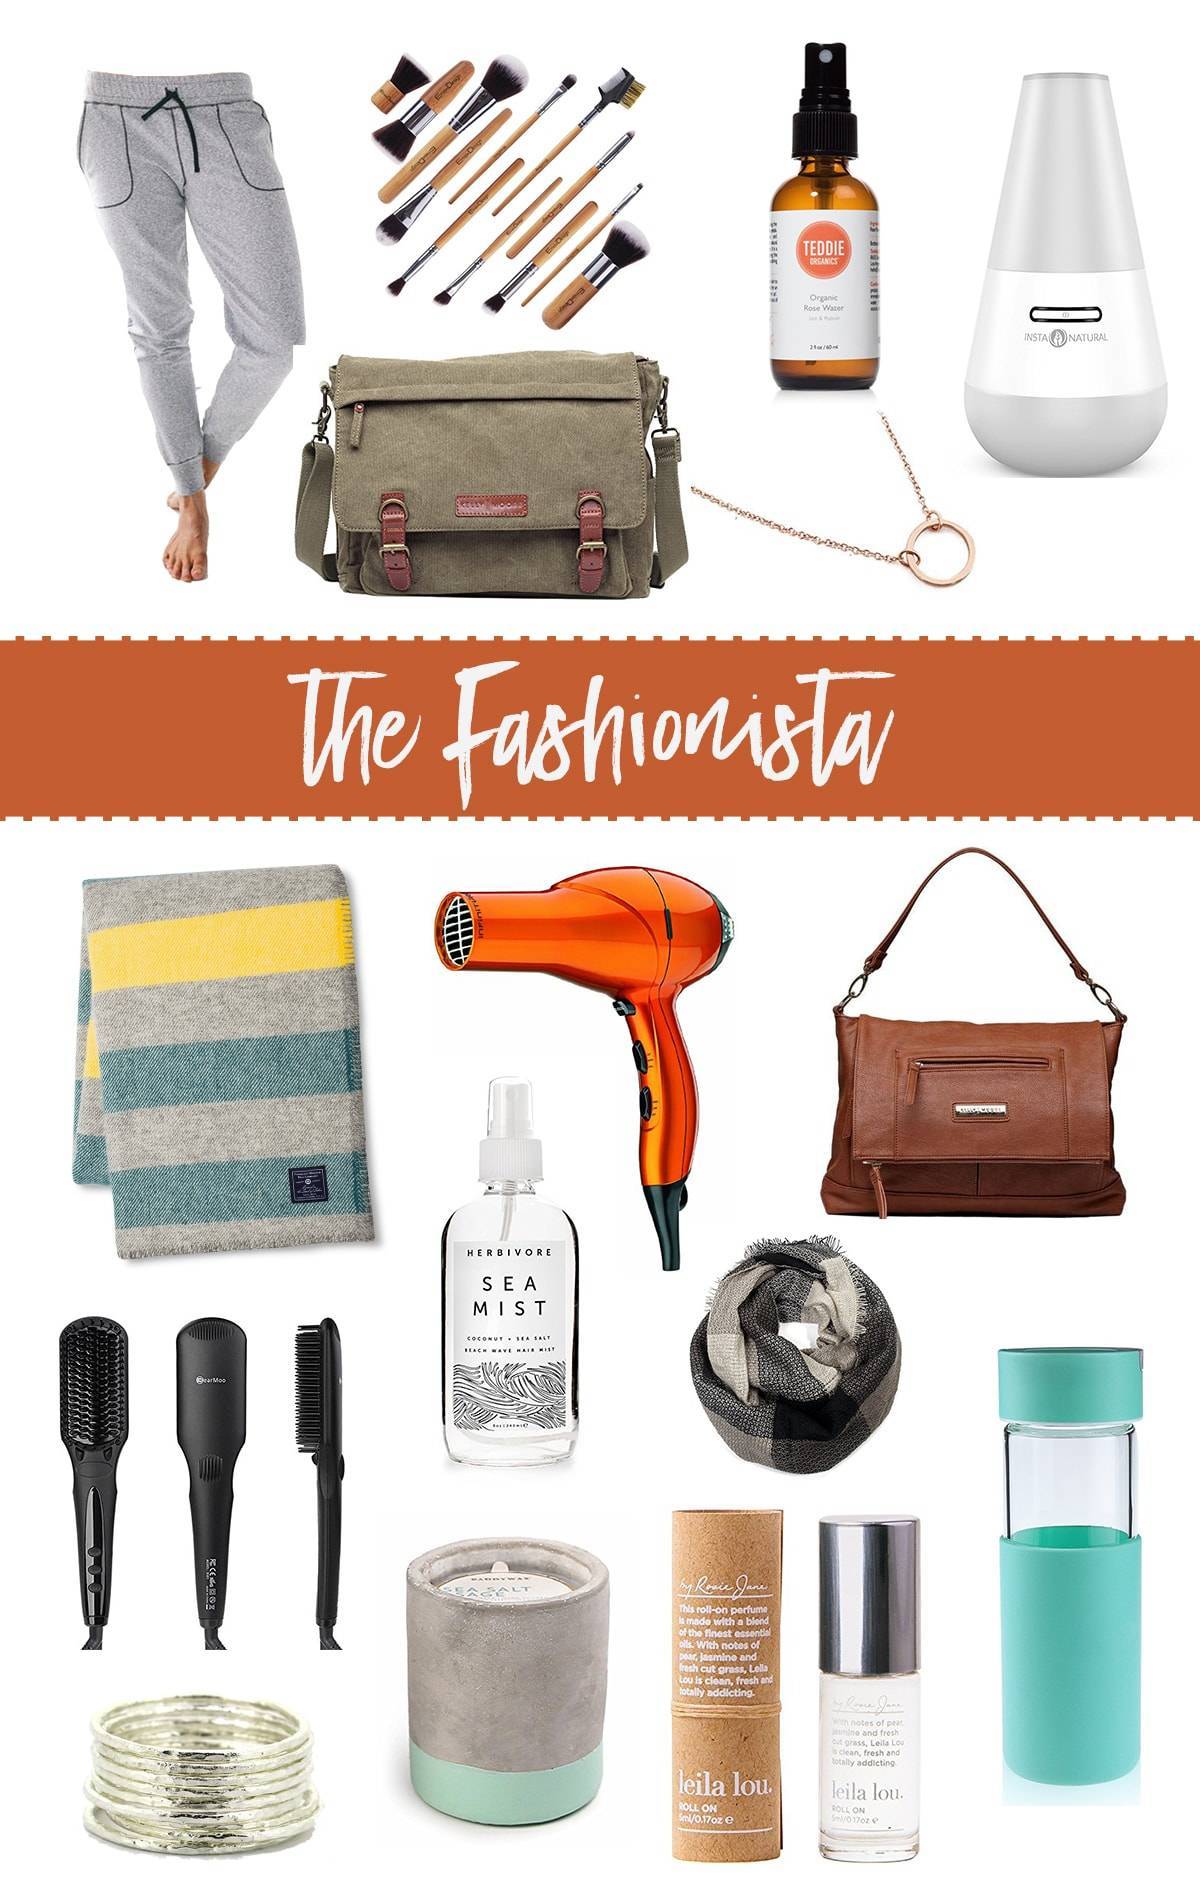 Fashionable and everyday use items for a girl